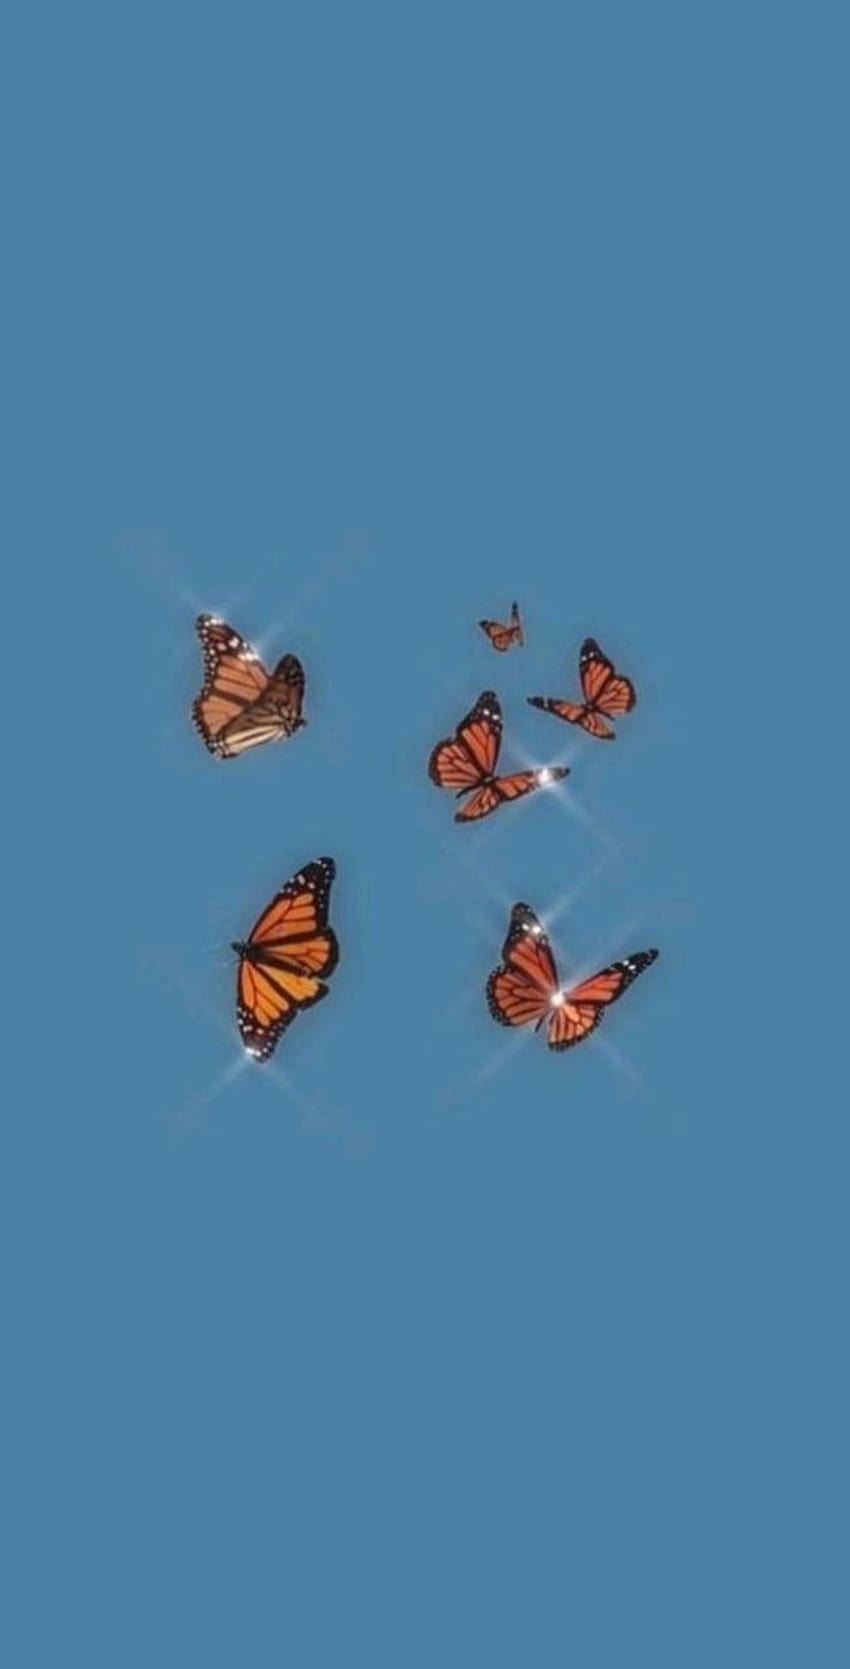 Aesthetic butterfly wallpaper for your phone or desktop background. - Butterfly